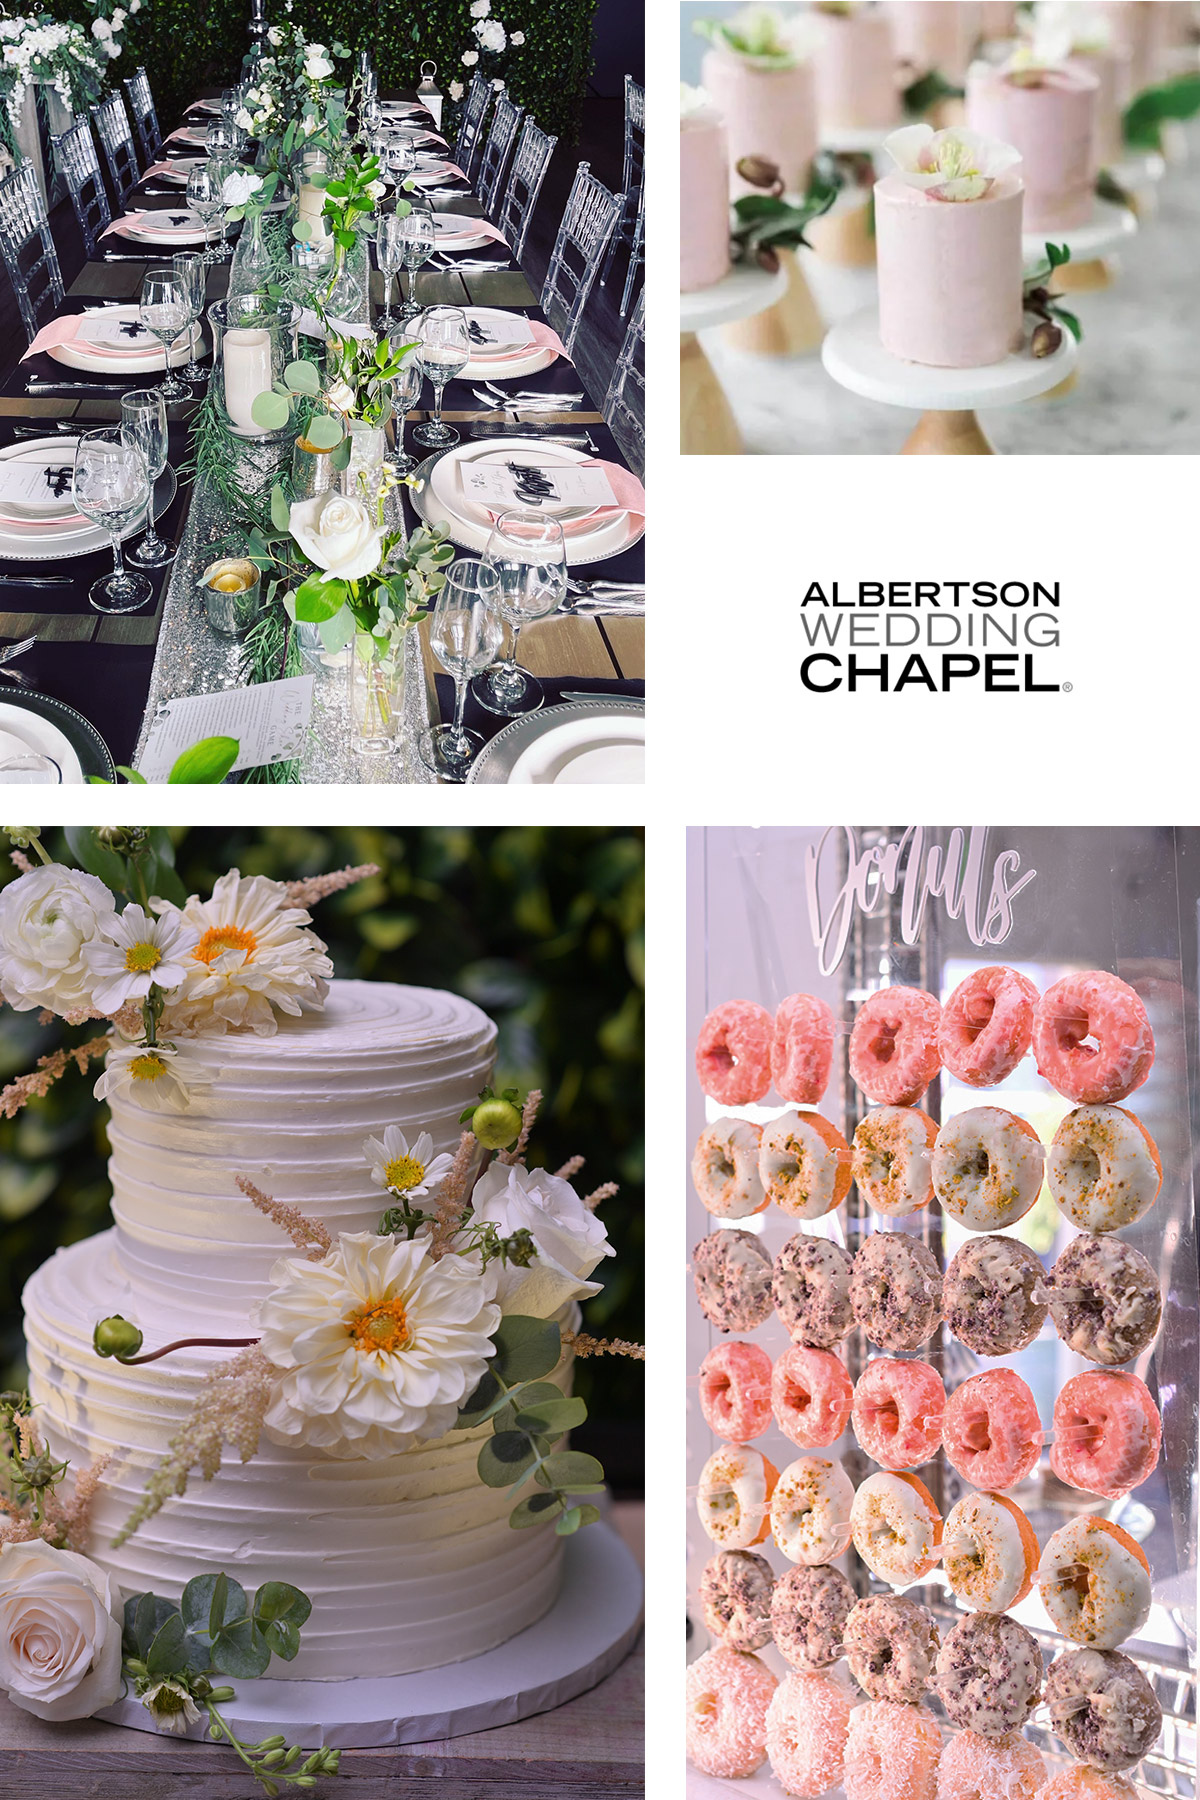 albertson wedding chapel in los angeles offers affordable wedding recpetions NEW 2